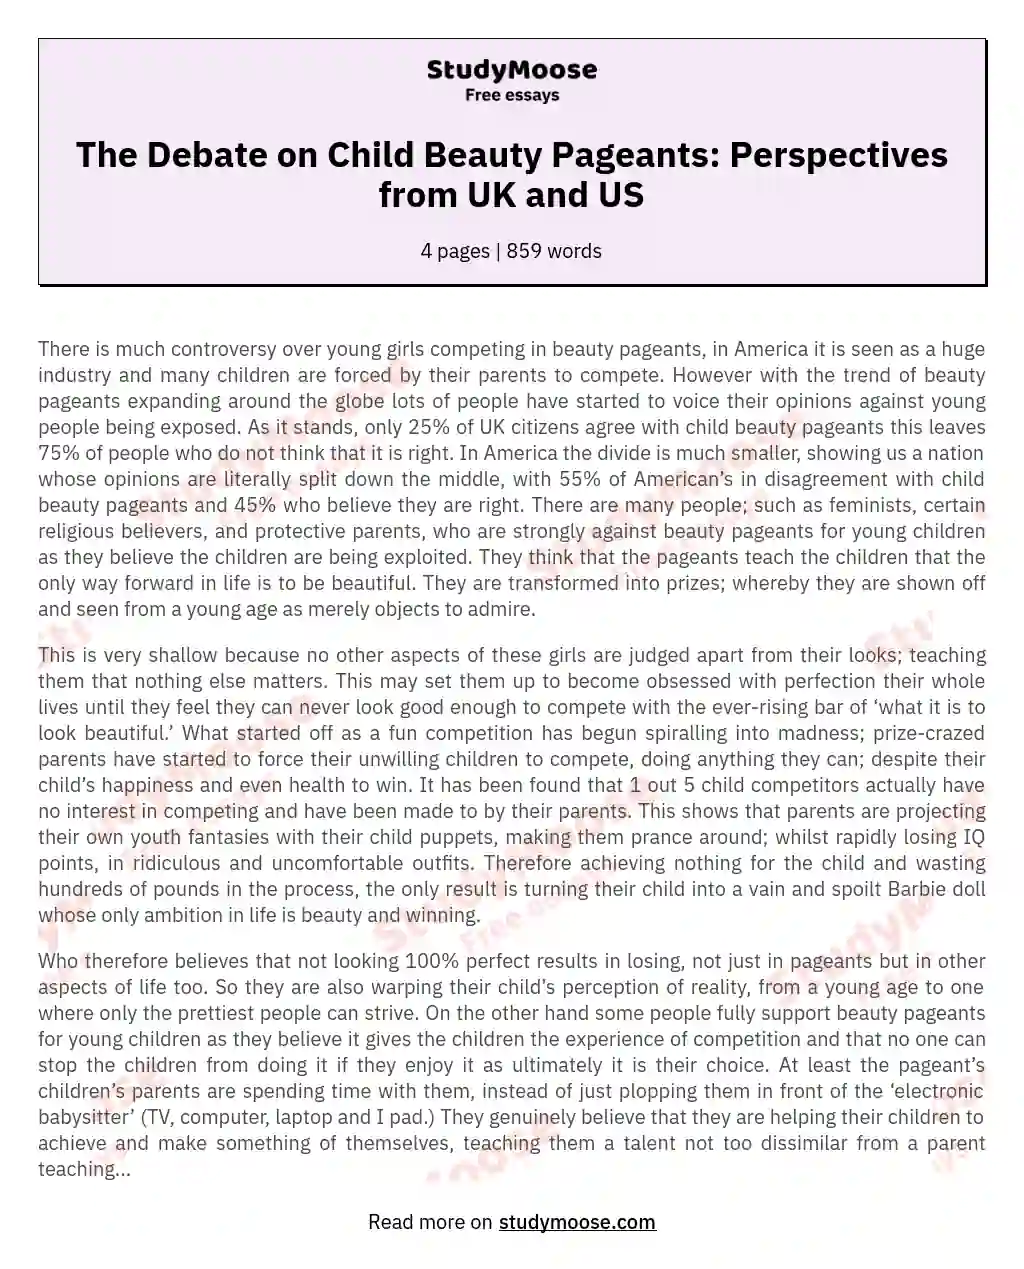 The Debate on Child Beauty Pageants: Perspectives from UK and US essay